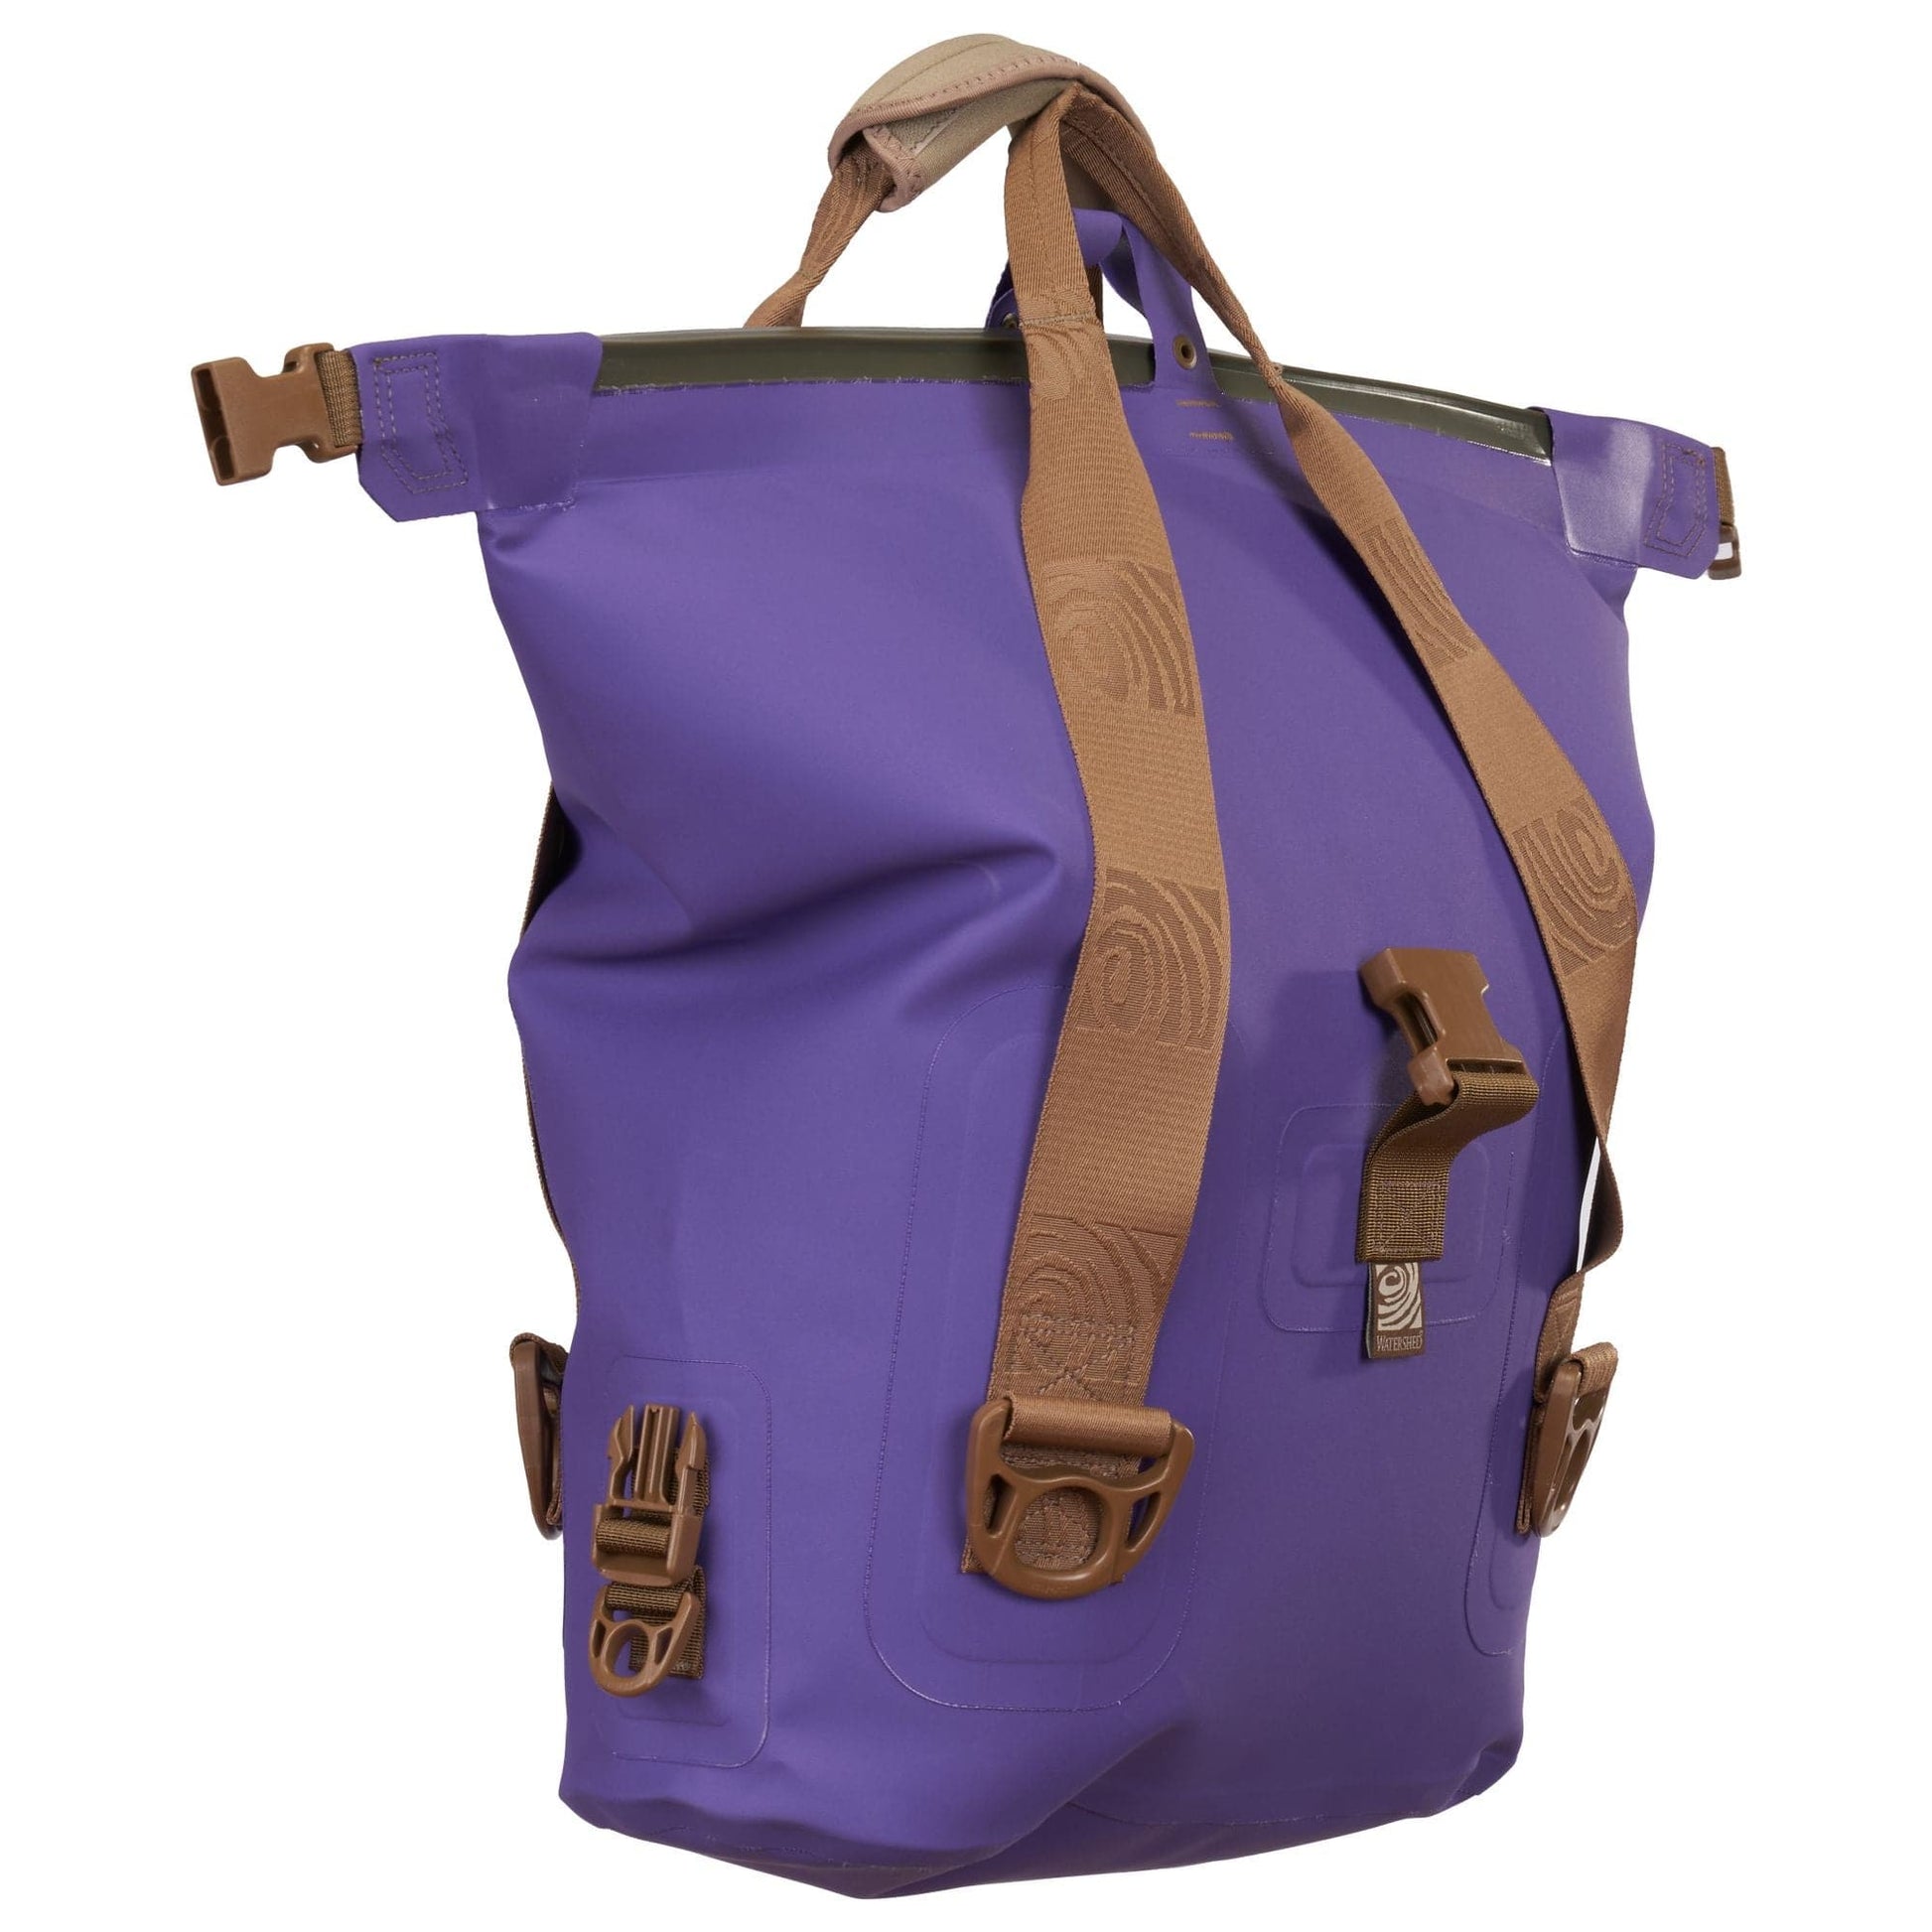 Featuring the Largo Tote dry bag manufactured by Watershed shown here from a fifth angle.